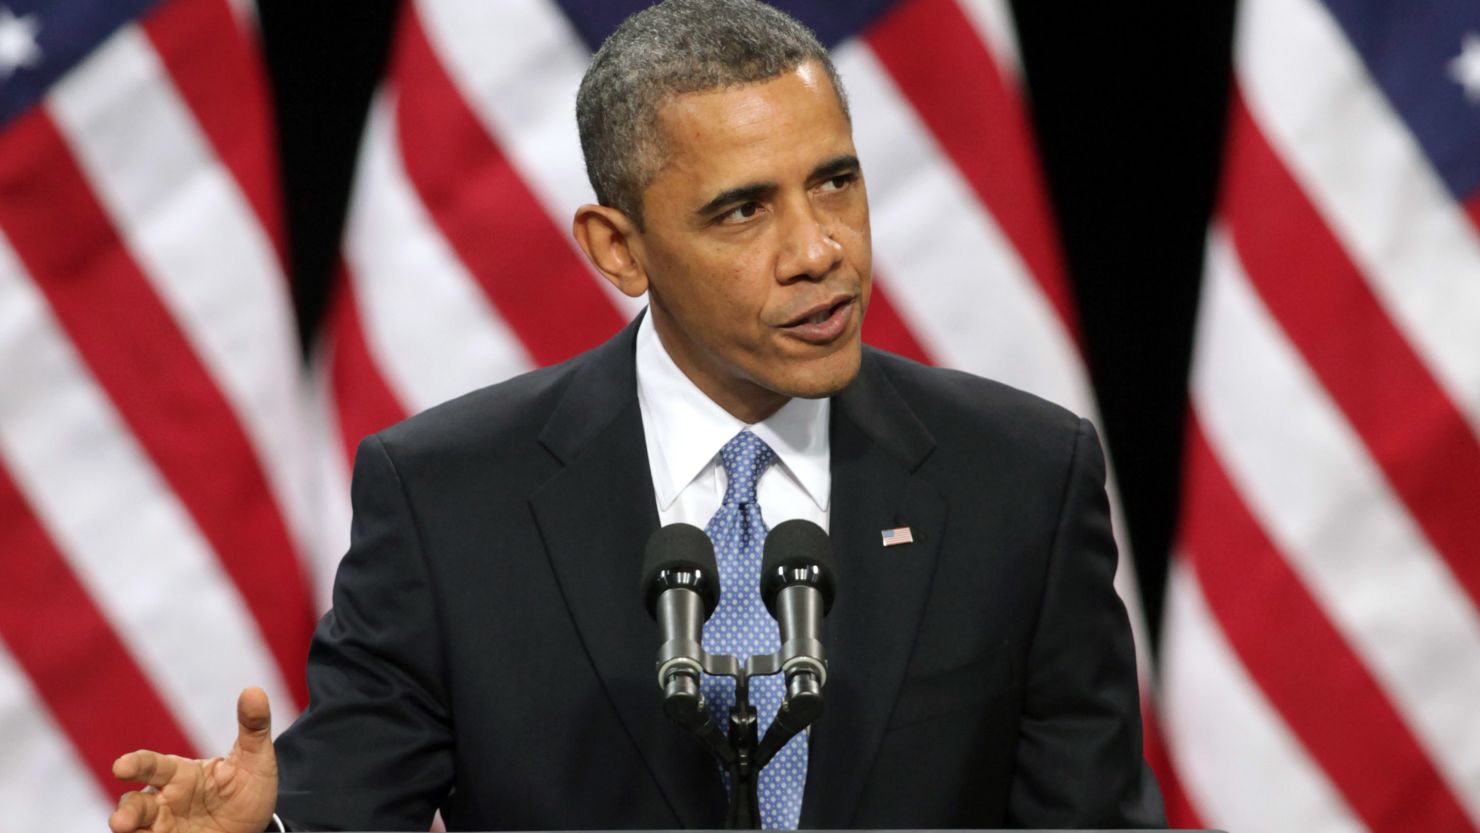 U.S. President Barack Obama delivers an address on January 29 about immigration reform, a highly contentious issue.